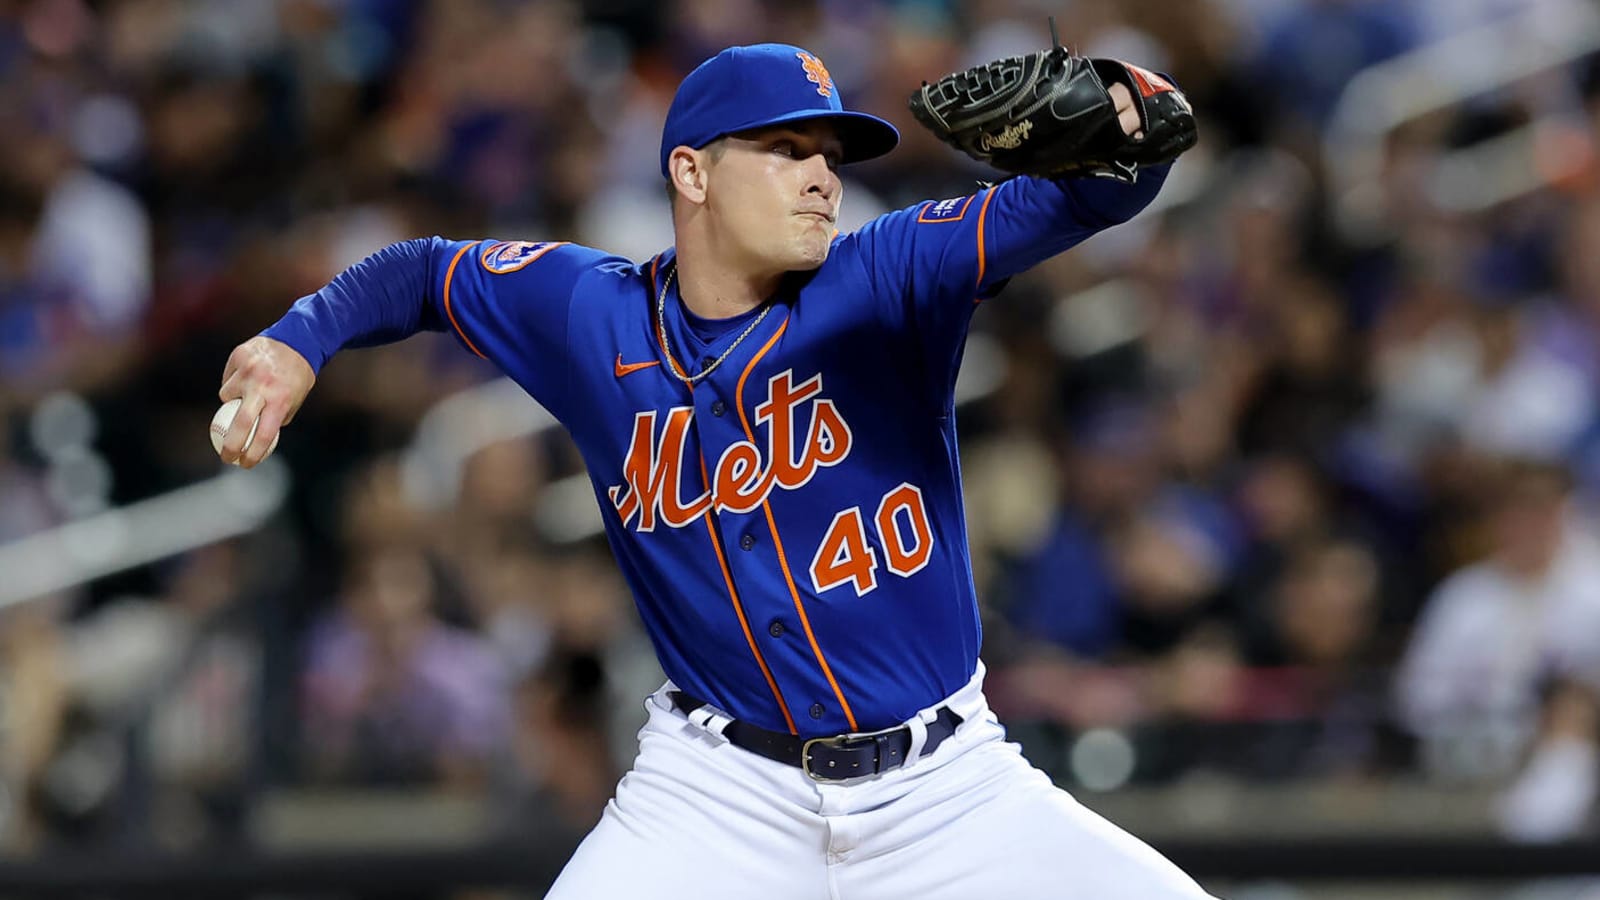 Mets RHP reportedly in trade discussions